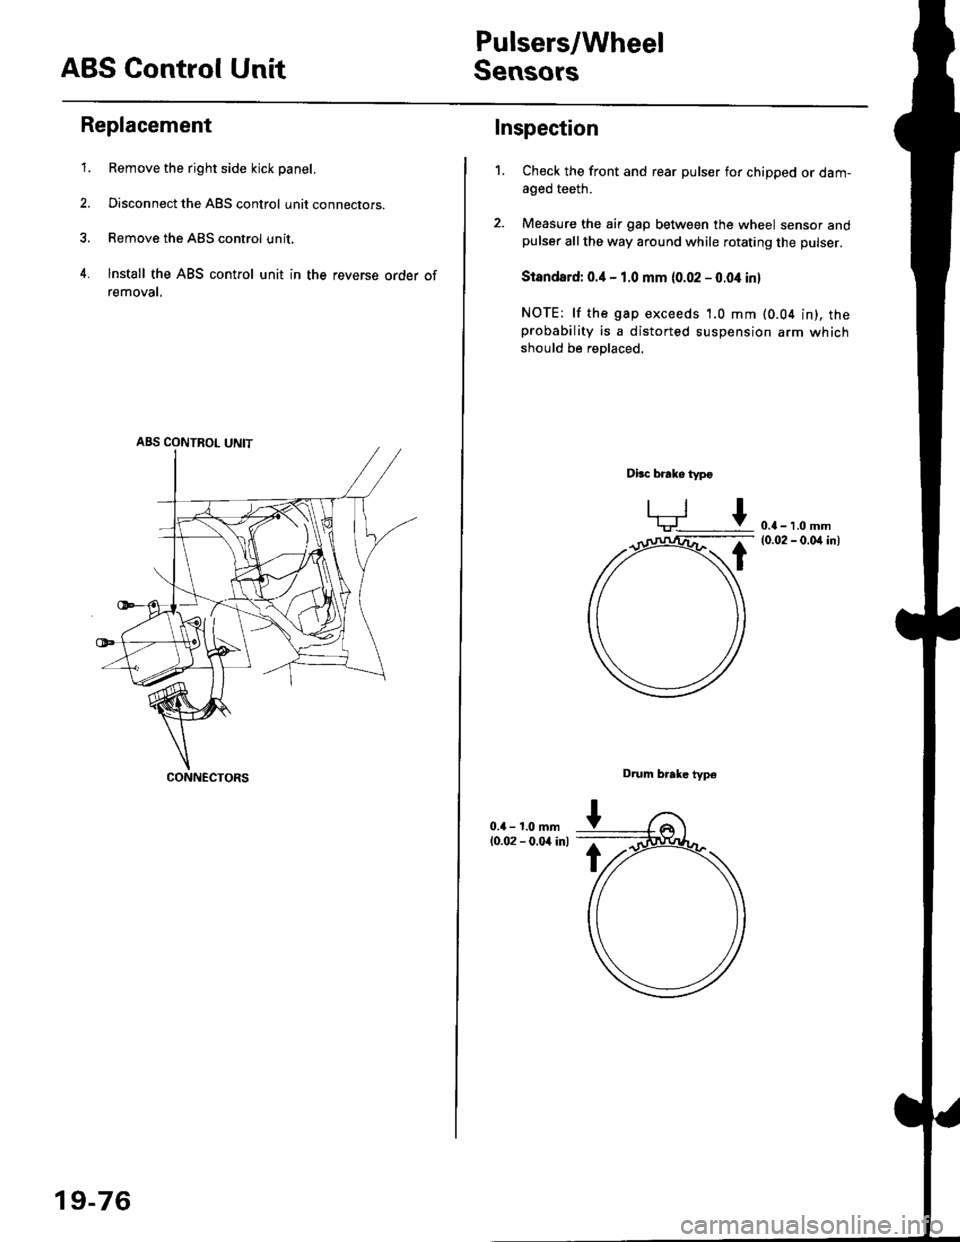 HONDA CIVIC 1996 6.G Owners Guide ABS Control Unit
Pulsers/Wheel
Sensors
Replacement
1. Remove the right side kick panel.
2. Disconnect the ABS control unit connecrors.
3. Remove the ABS control unit,
4. lnstall the ABS control unit i